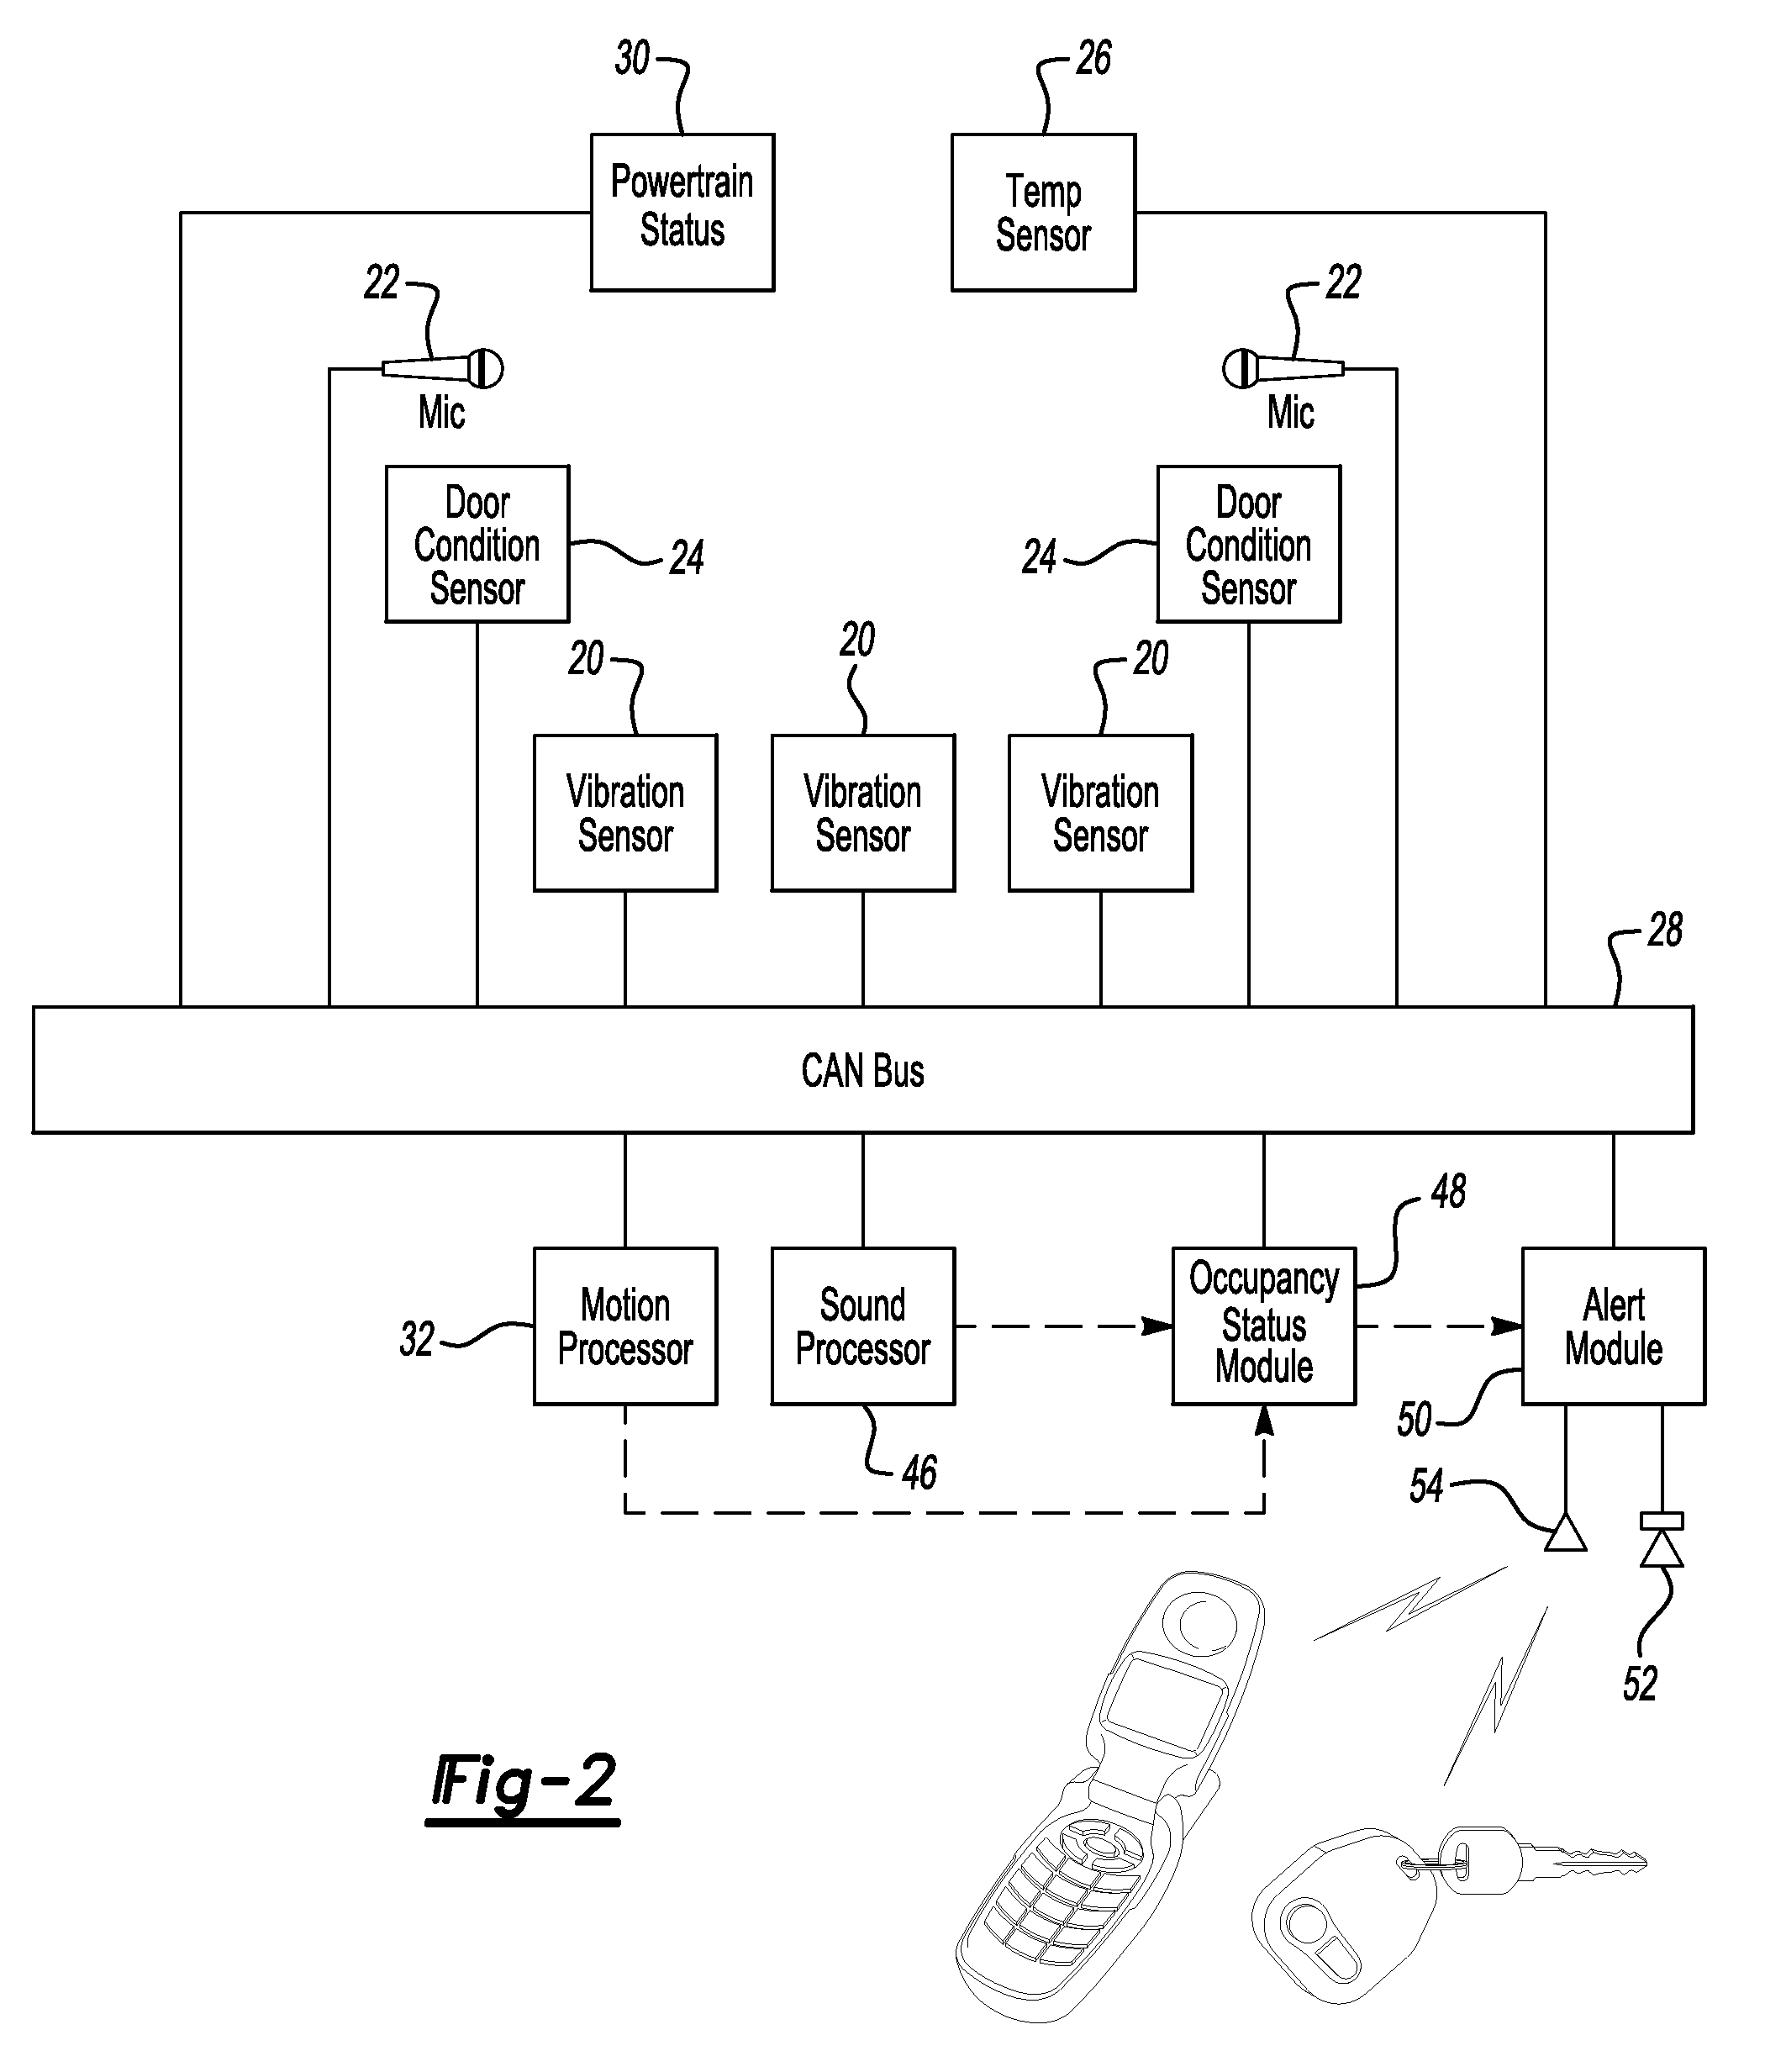 Method and Apparatus for In-Vehicle Presence Detection and Driver Alerting